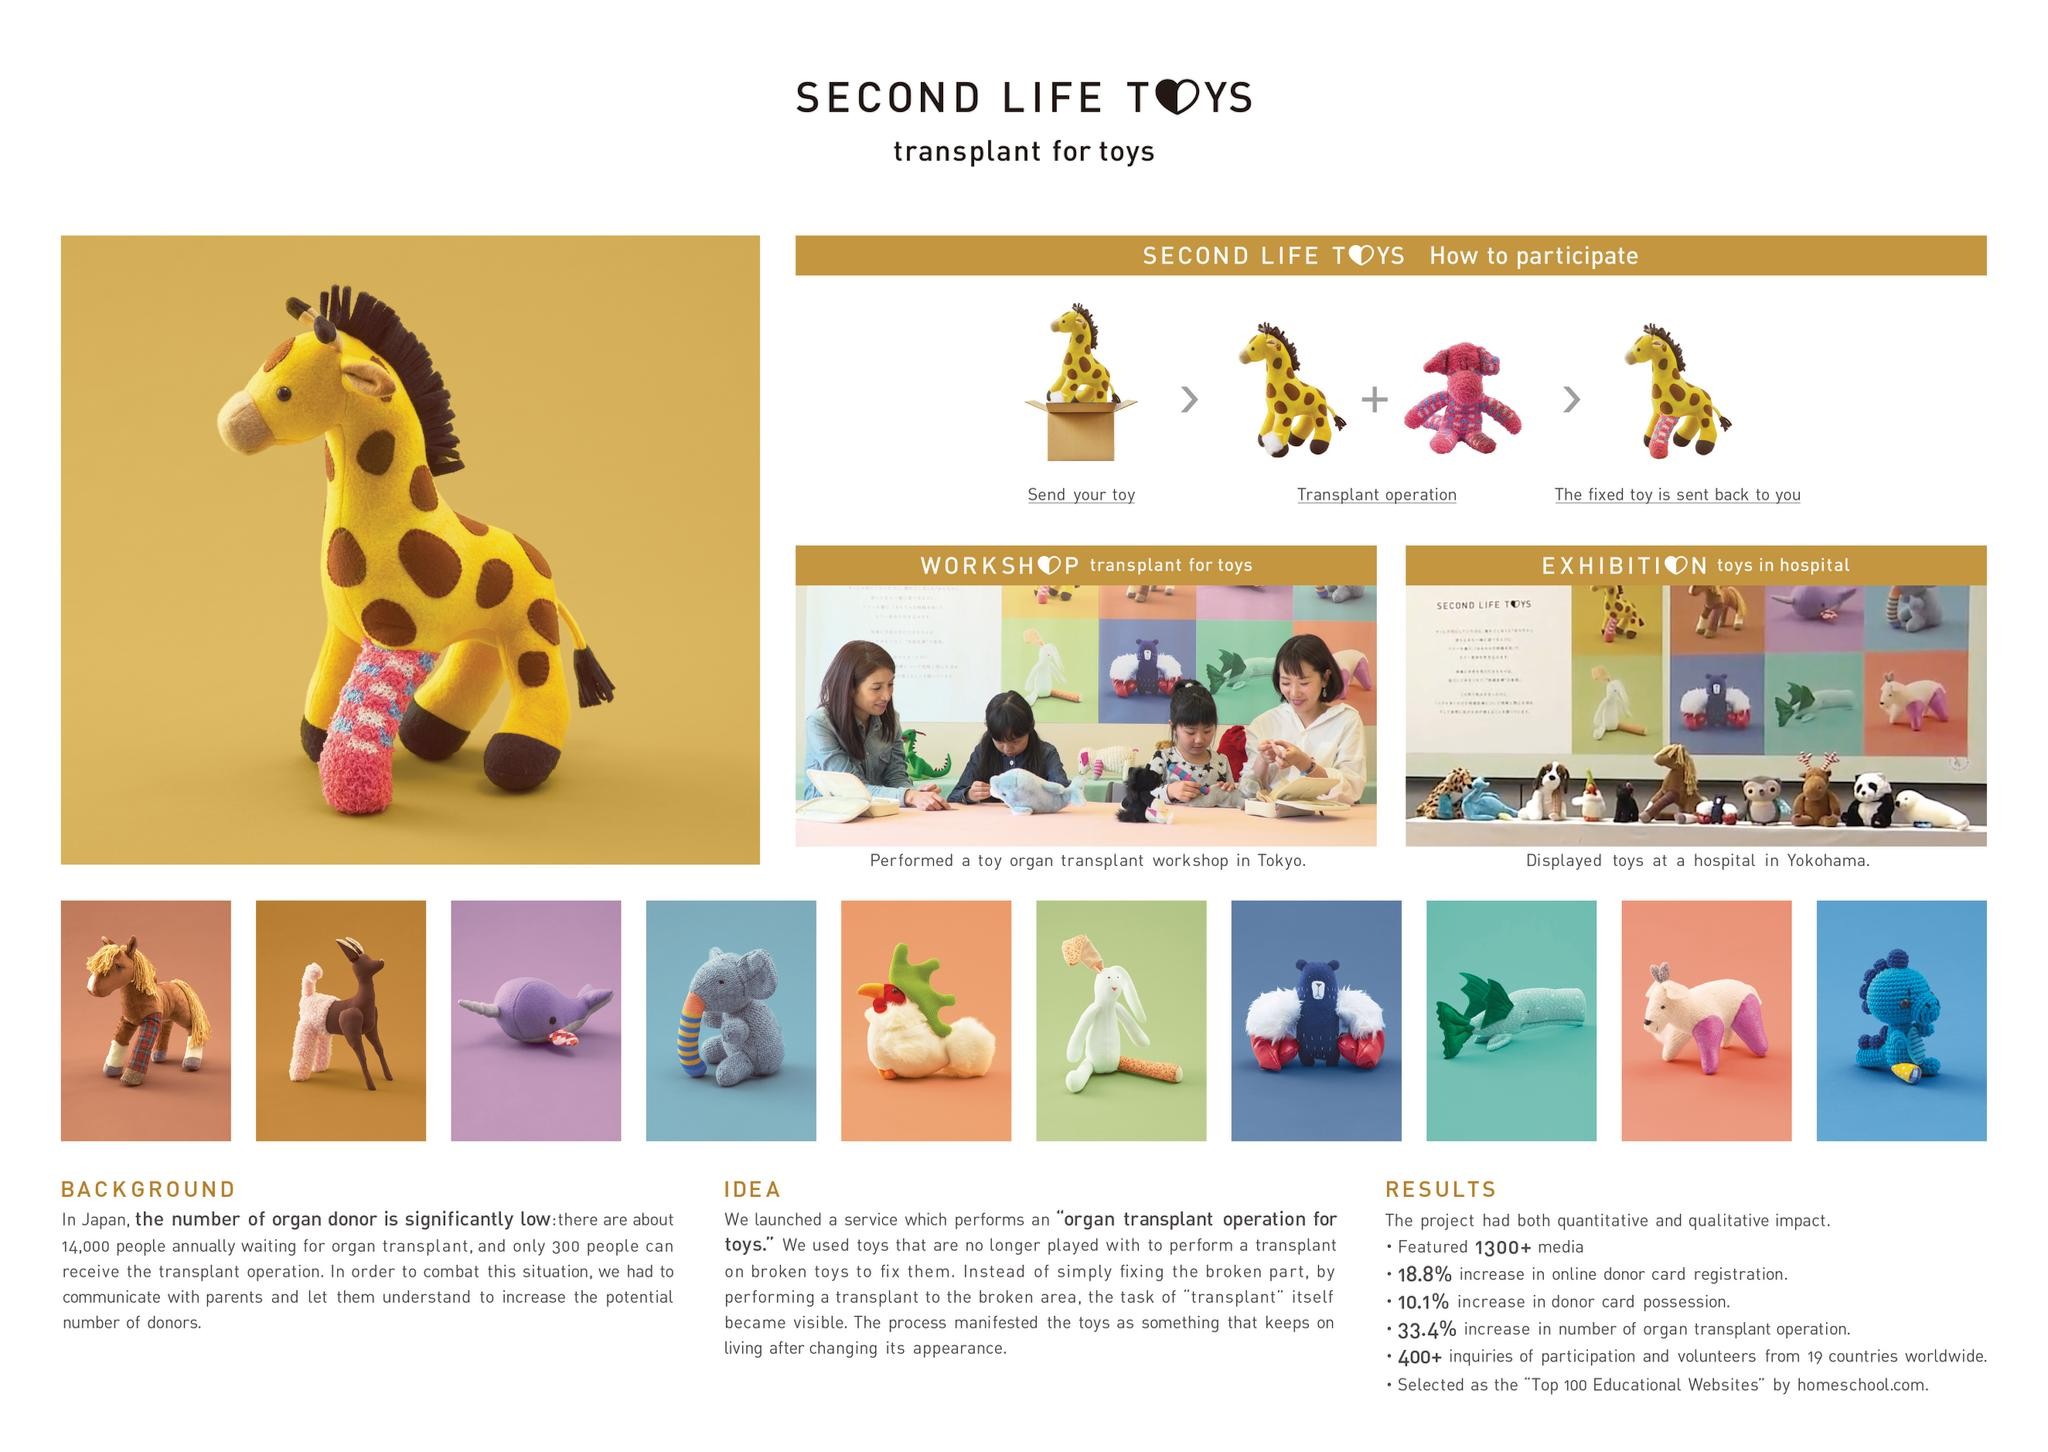 SECOND LIFE TOYS